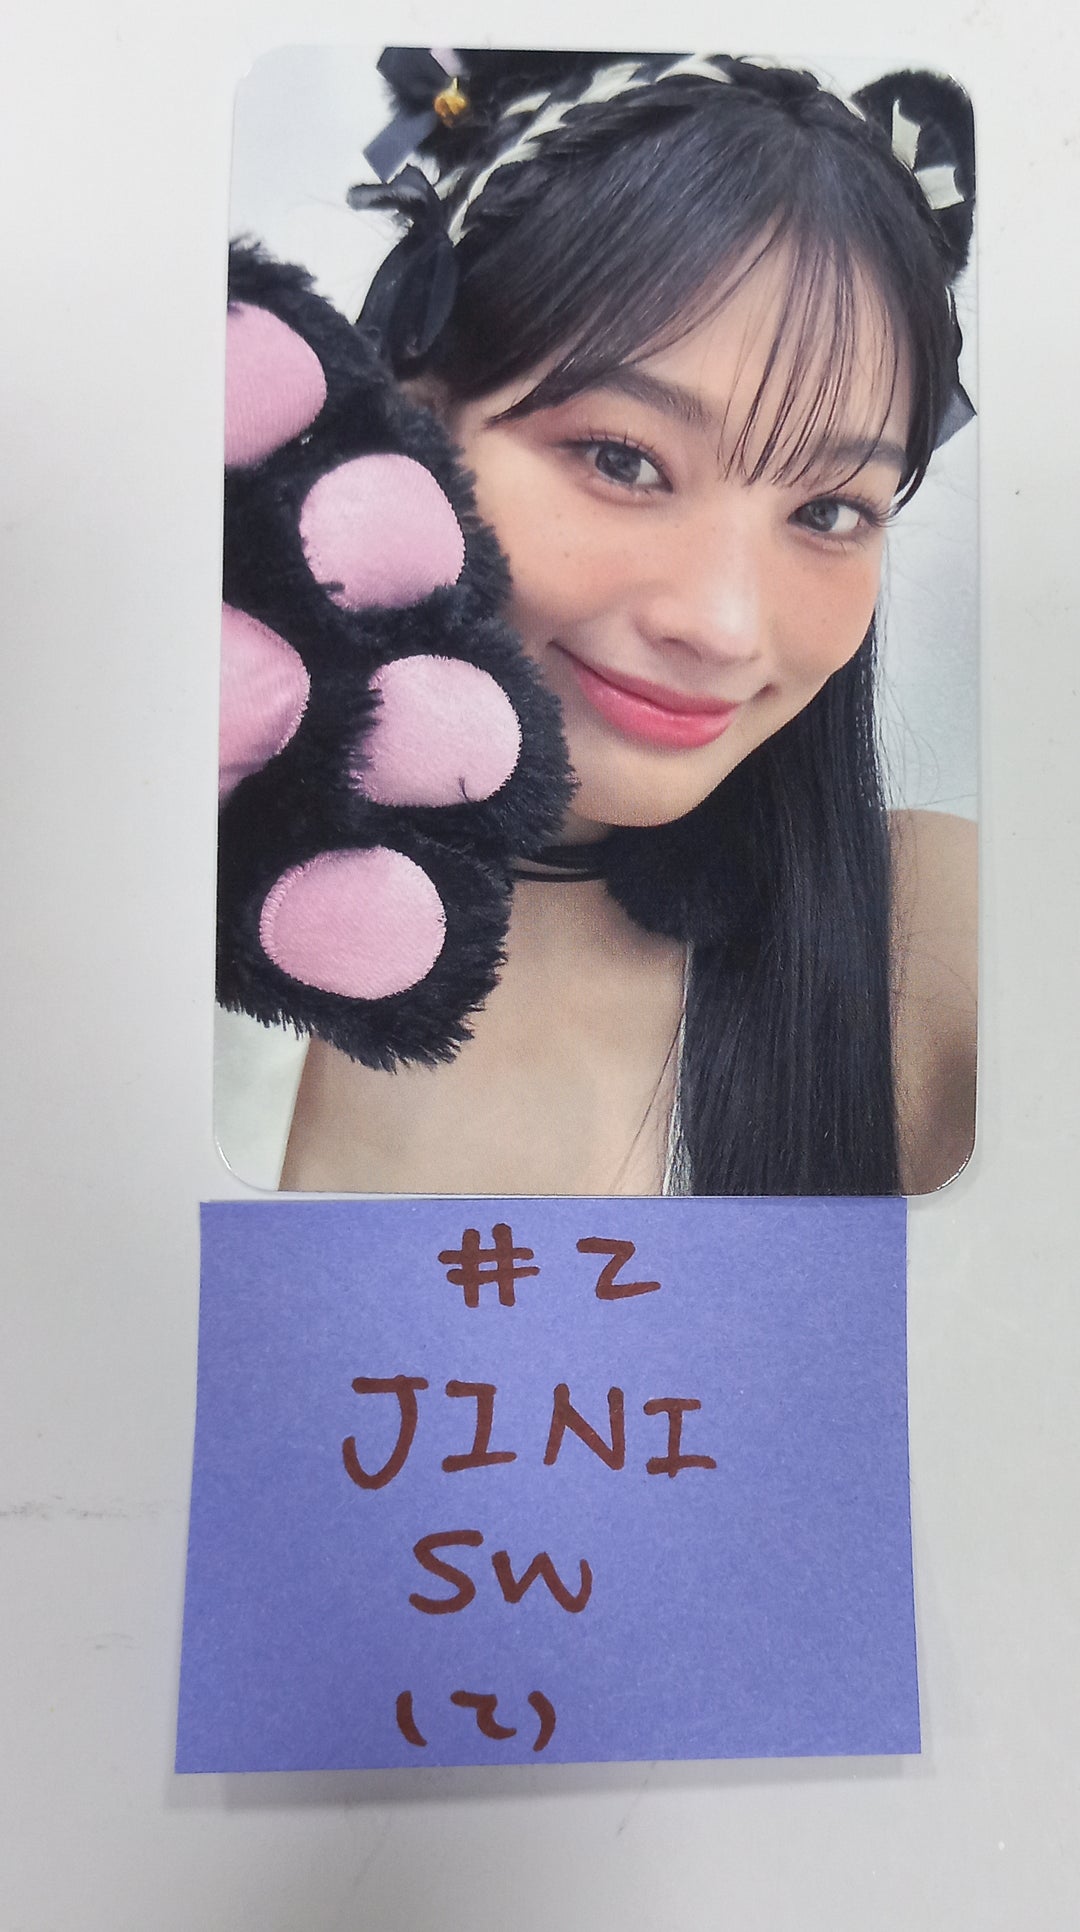 JINI "An Iron Hand In A Velvet Glove" - Soundwave Fansign Event Photocard Round 3 [23.11.23]